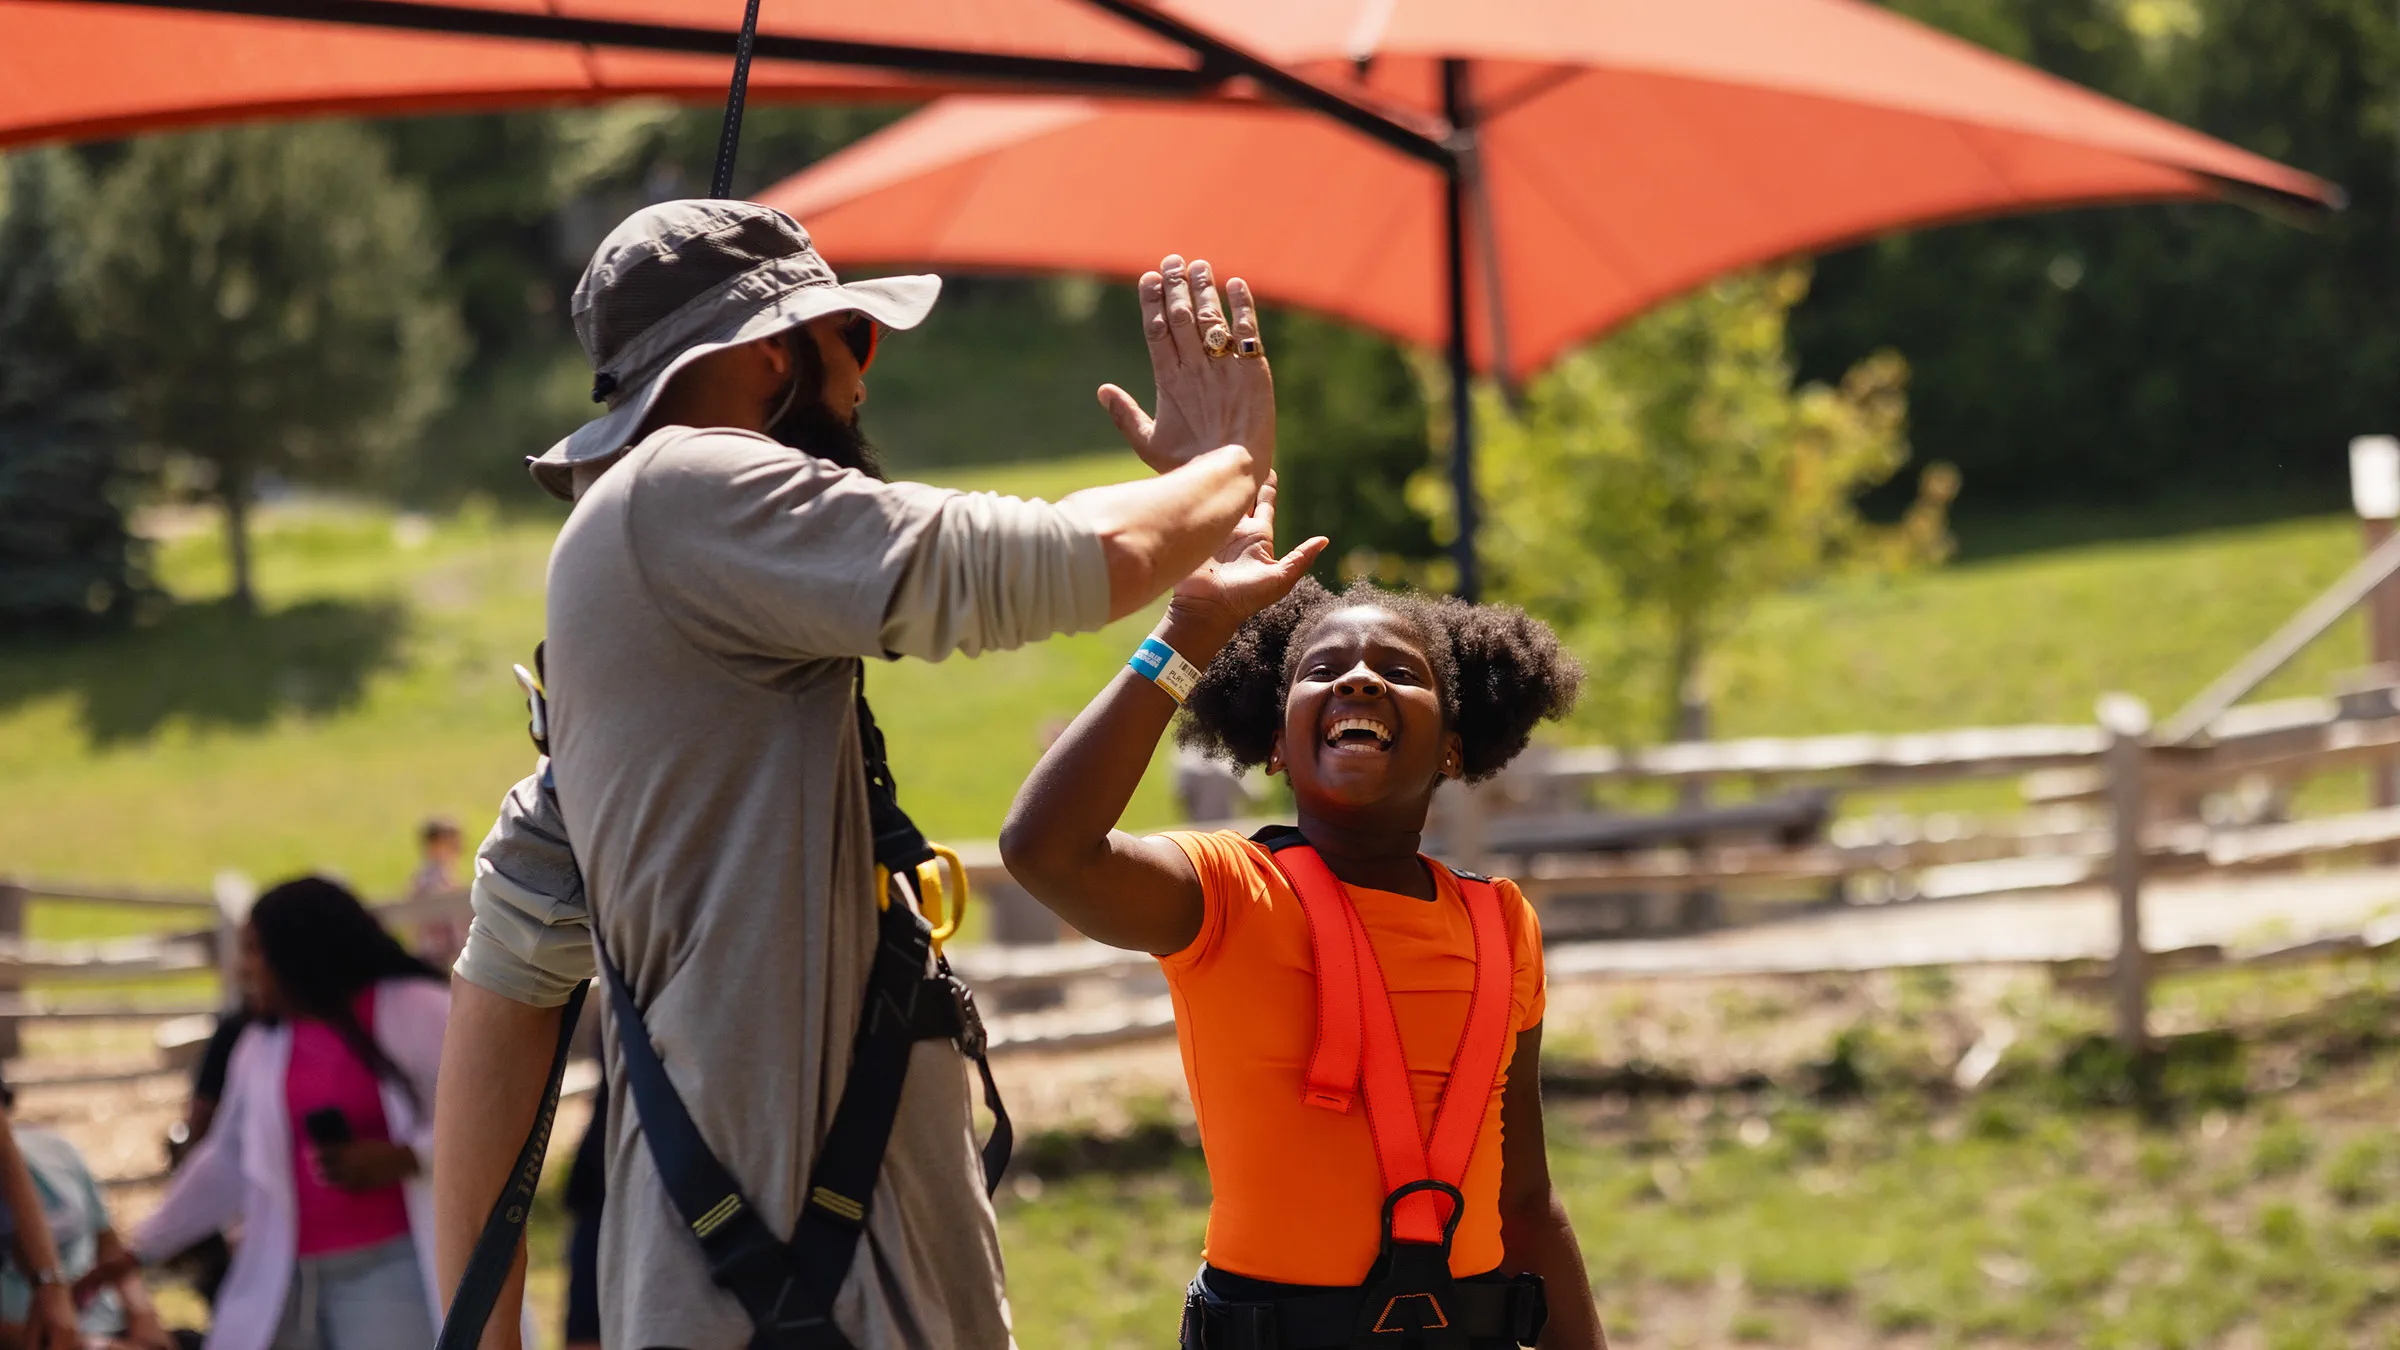 A child wearing a harness gives a high five to an instructor outdoors.